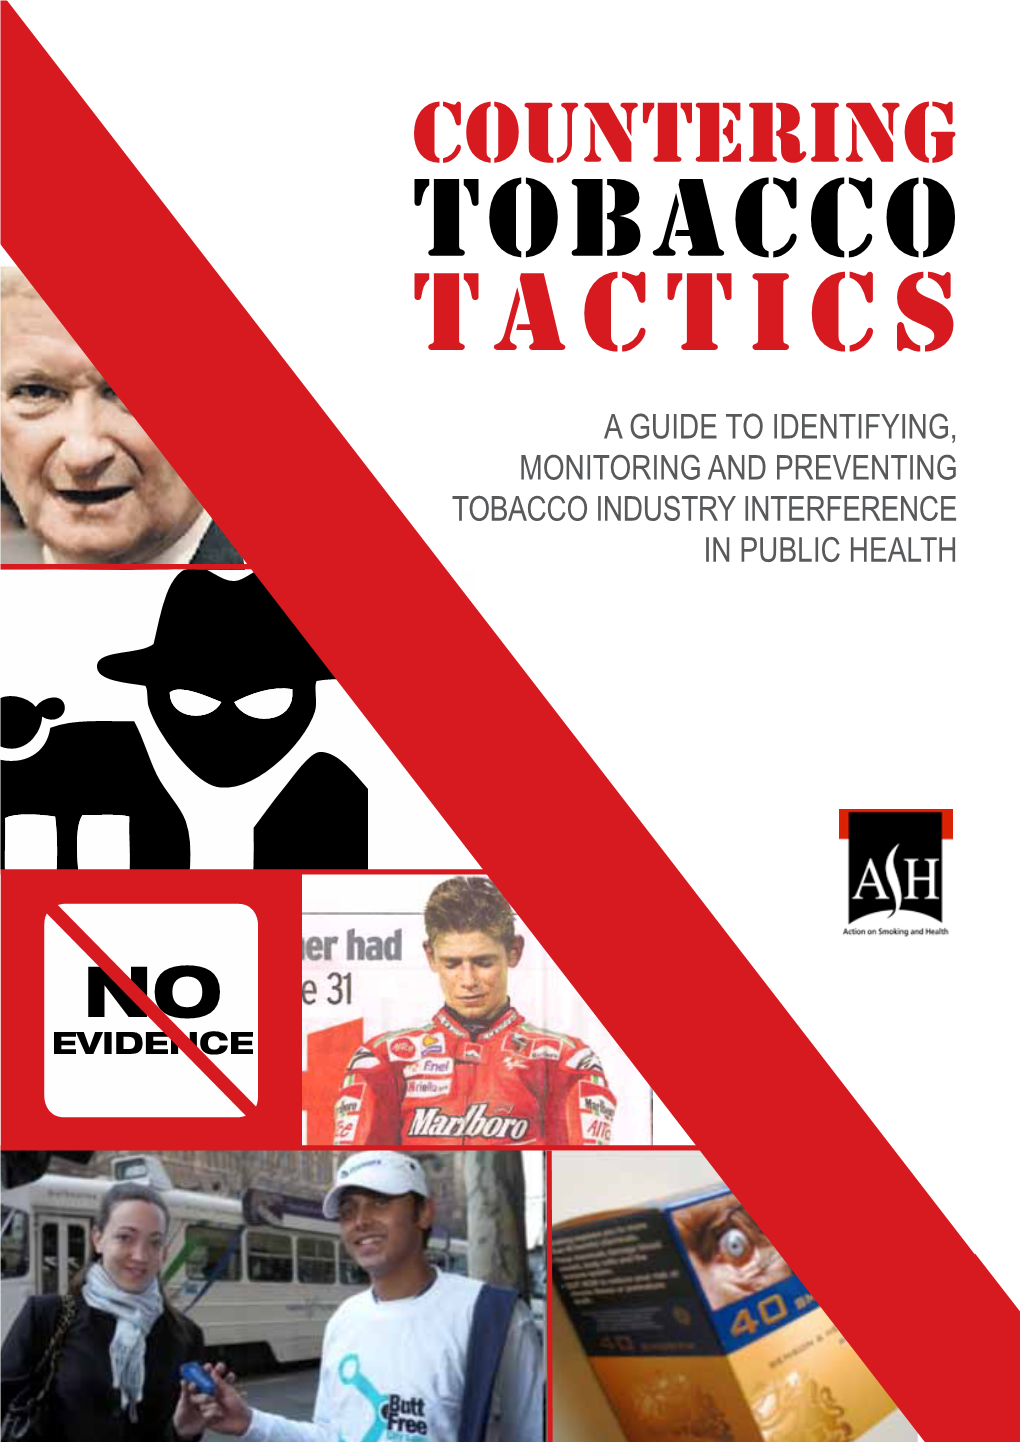 Tobacco Tactics a Guide to Identifying, Monitoring and Preventing Tobacco Industry Interference in Public Health